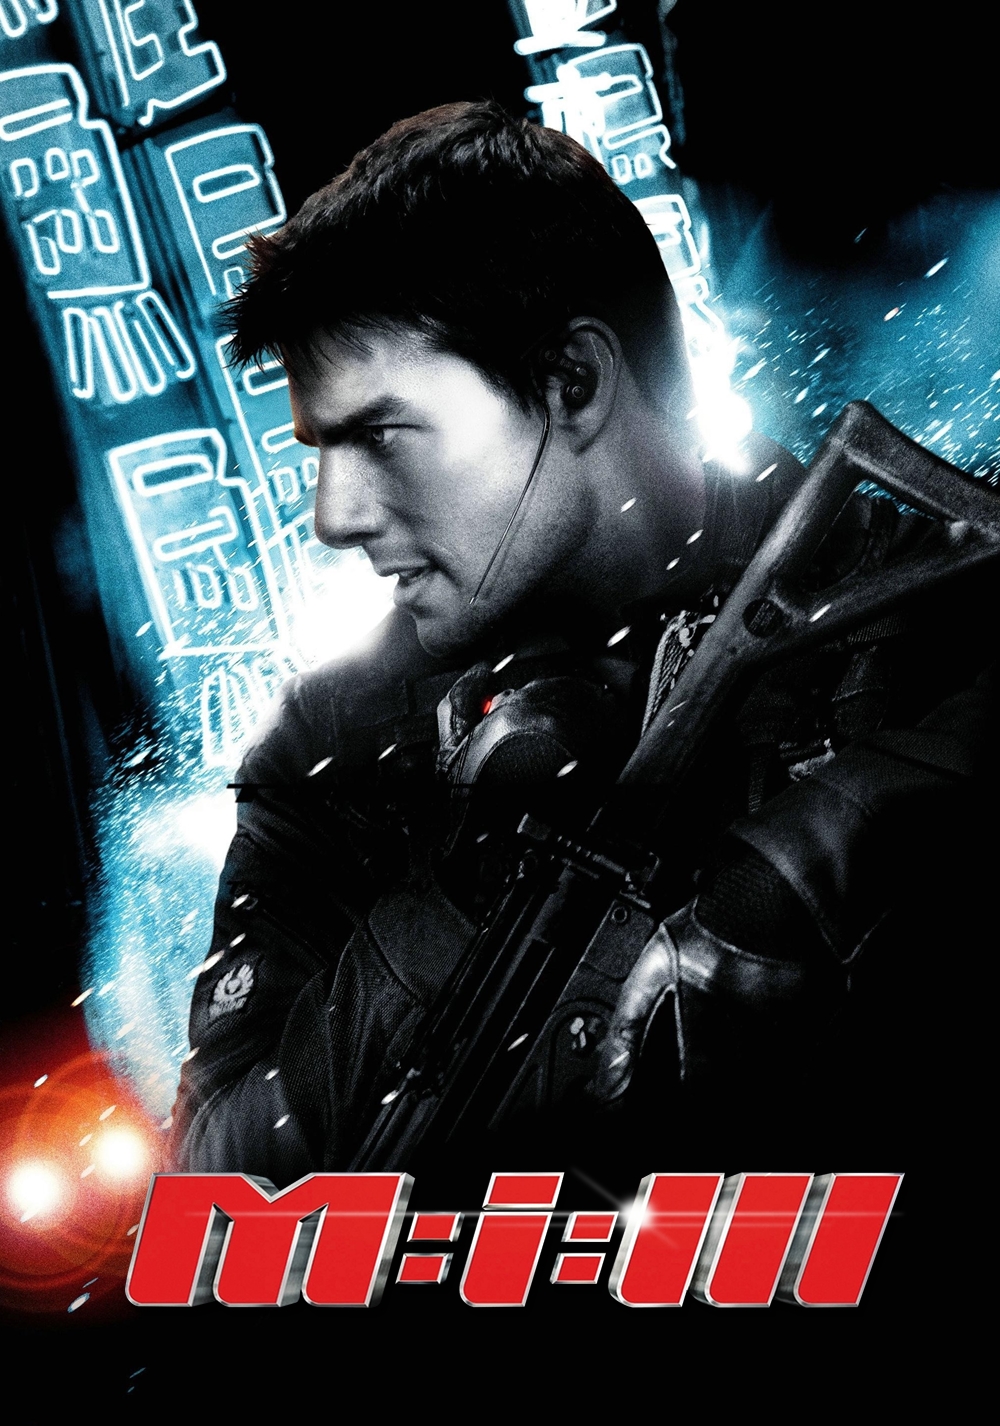 Mission: Impossible III HD wallpapers, Desktop wallpaper - most viewed